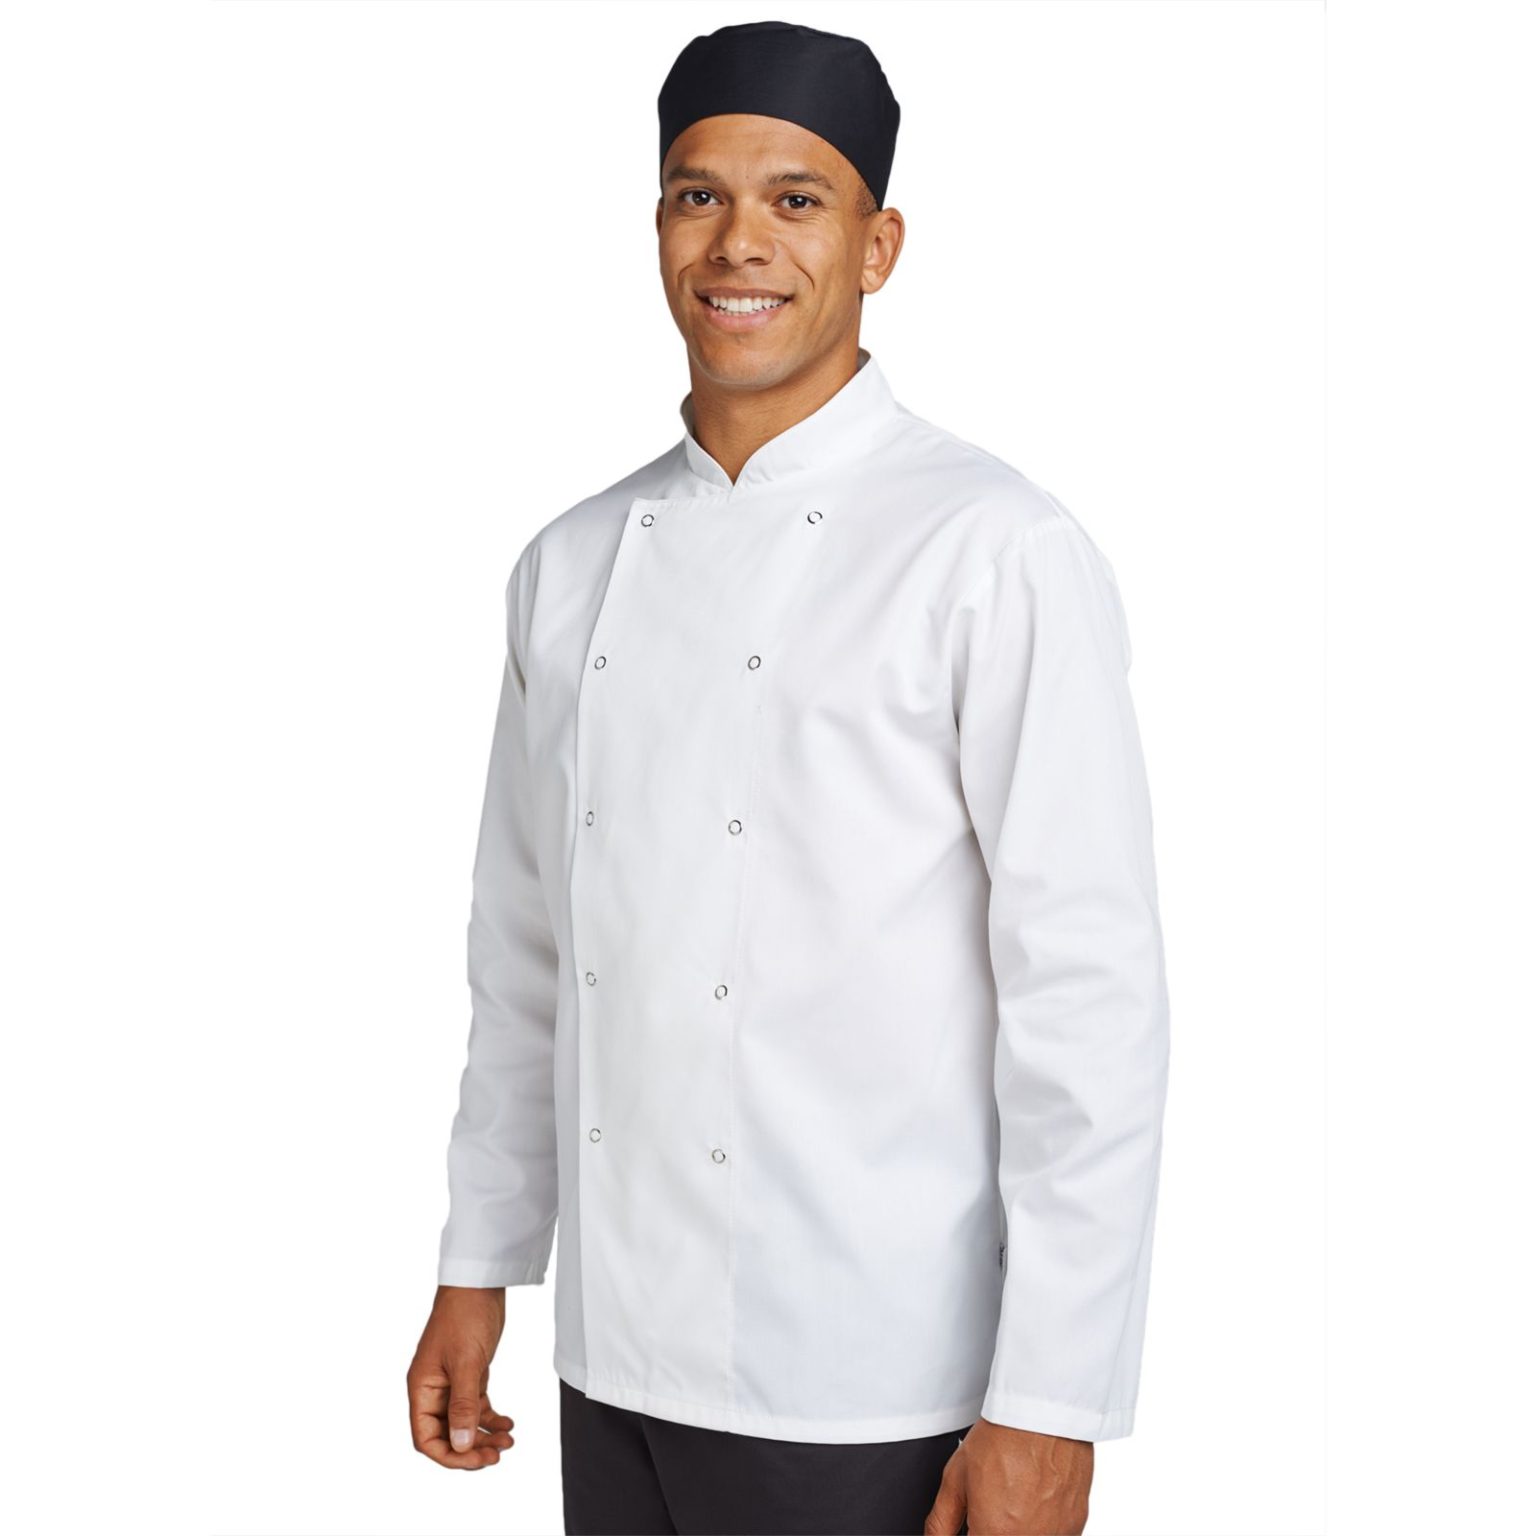 Le Chef Staycool Tunic Style Chef Jacket Short Sleeve Black – HH Products